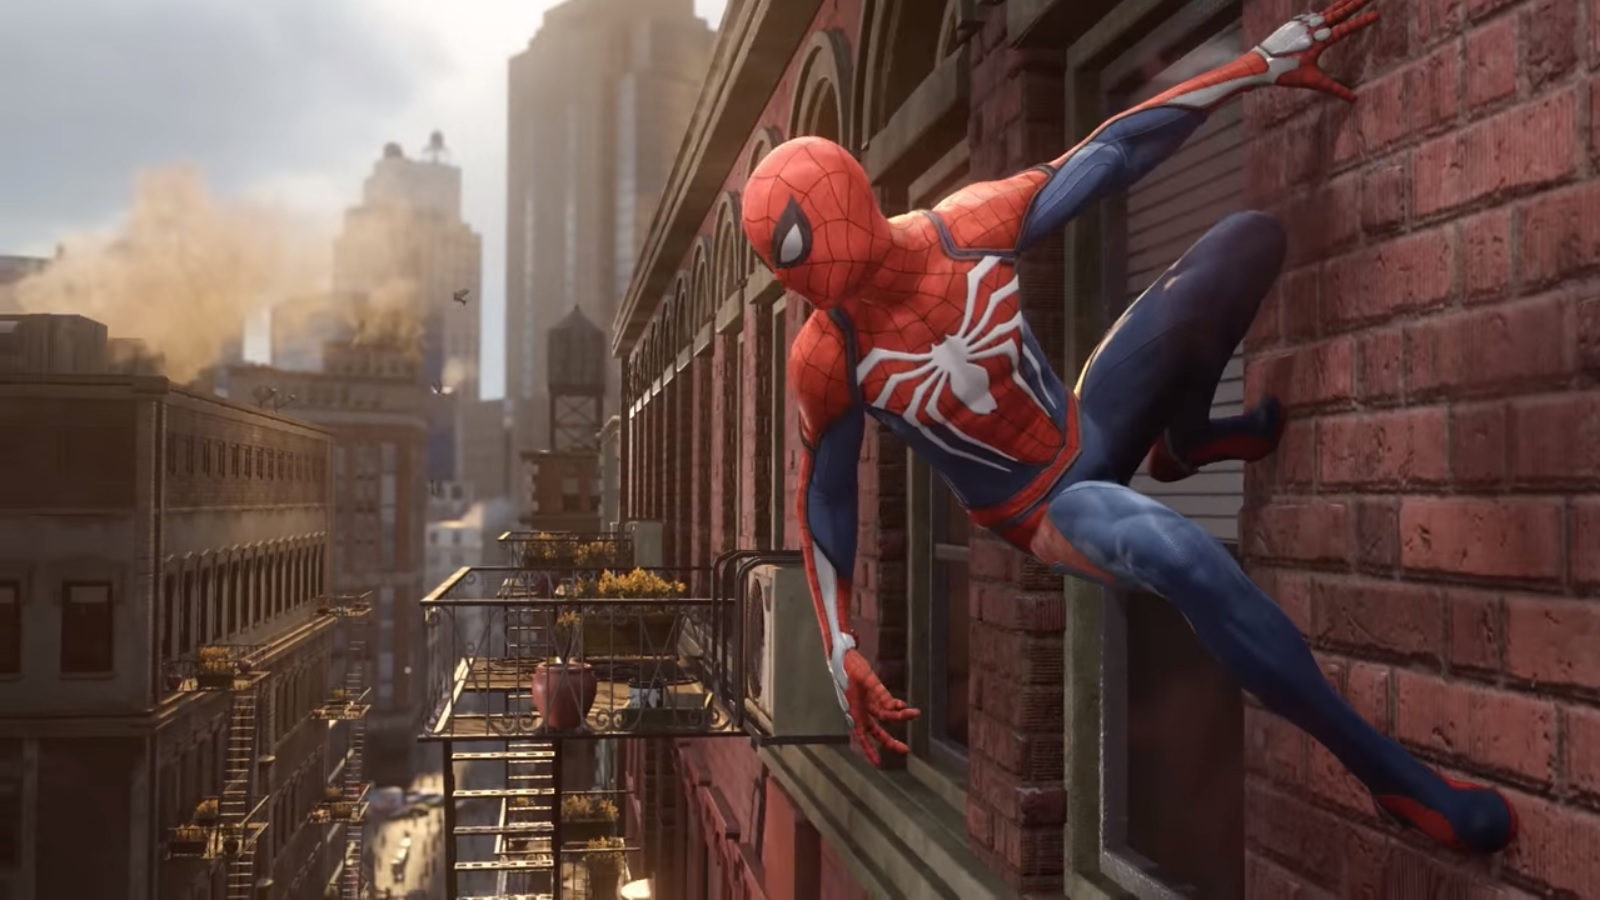 The First 20 Minutes of Marvel's Spider-Man (PS4) Gameplay in 4K 